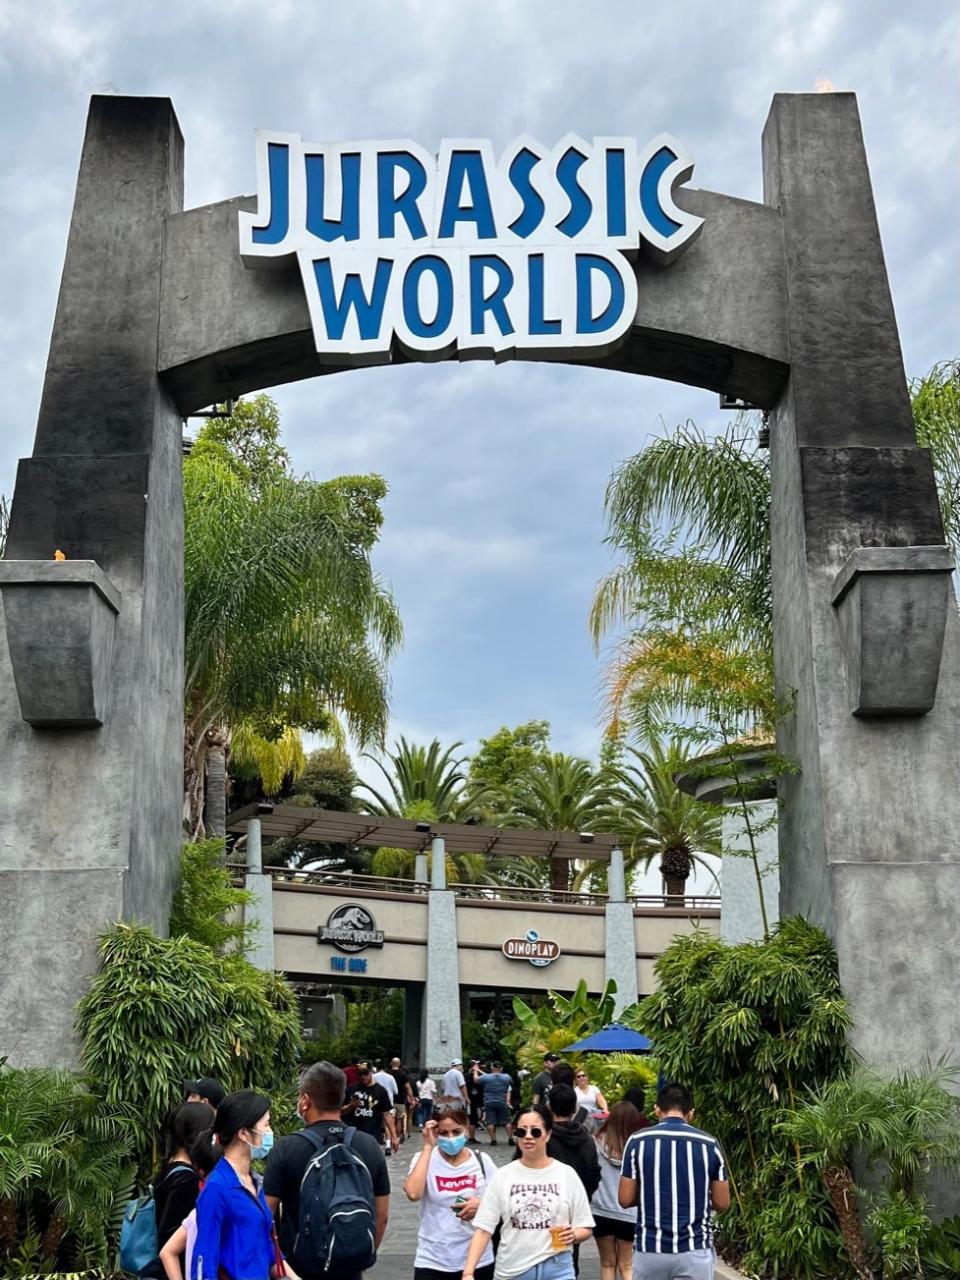 Jurassic World - The Ride is one of the most popular attractions at Universal Studios Hollywood.